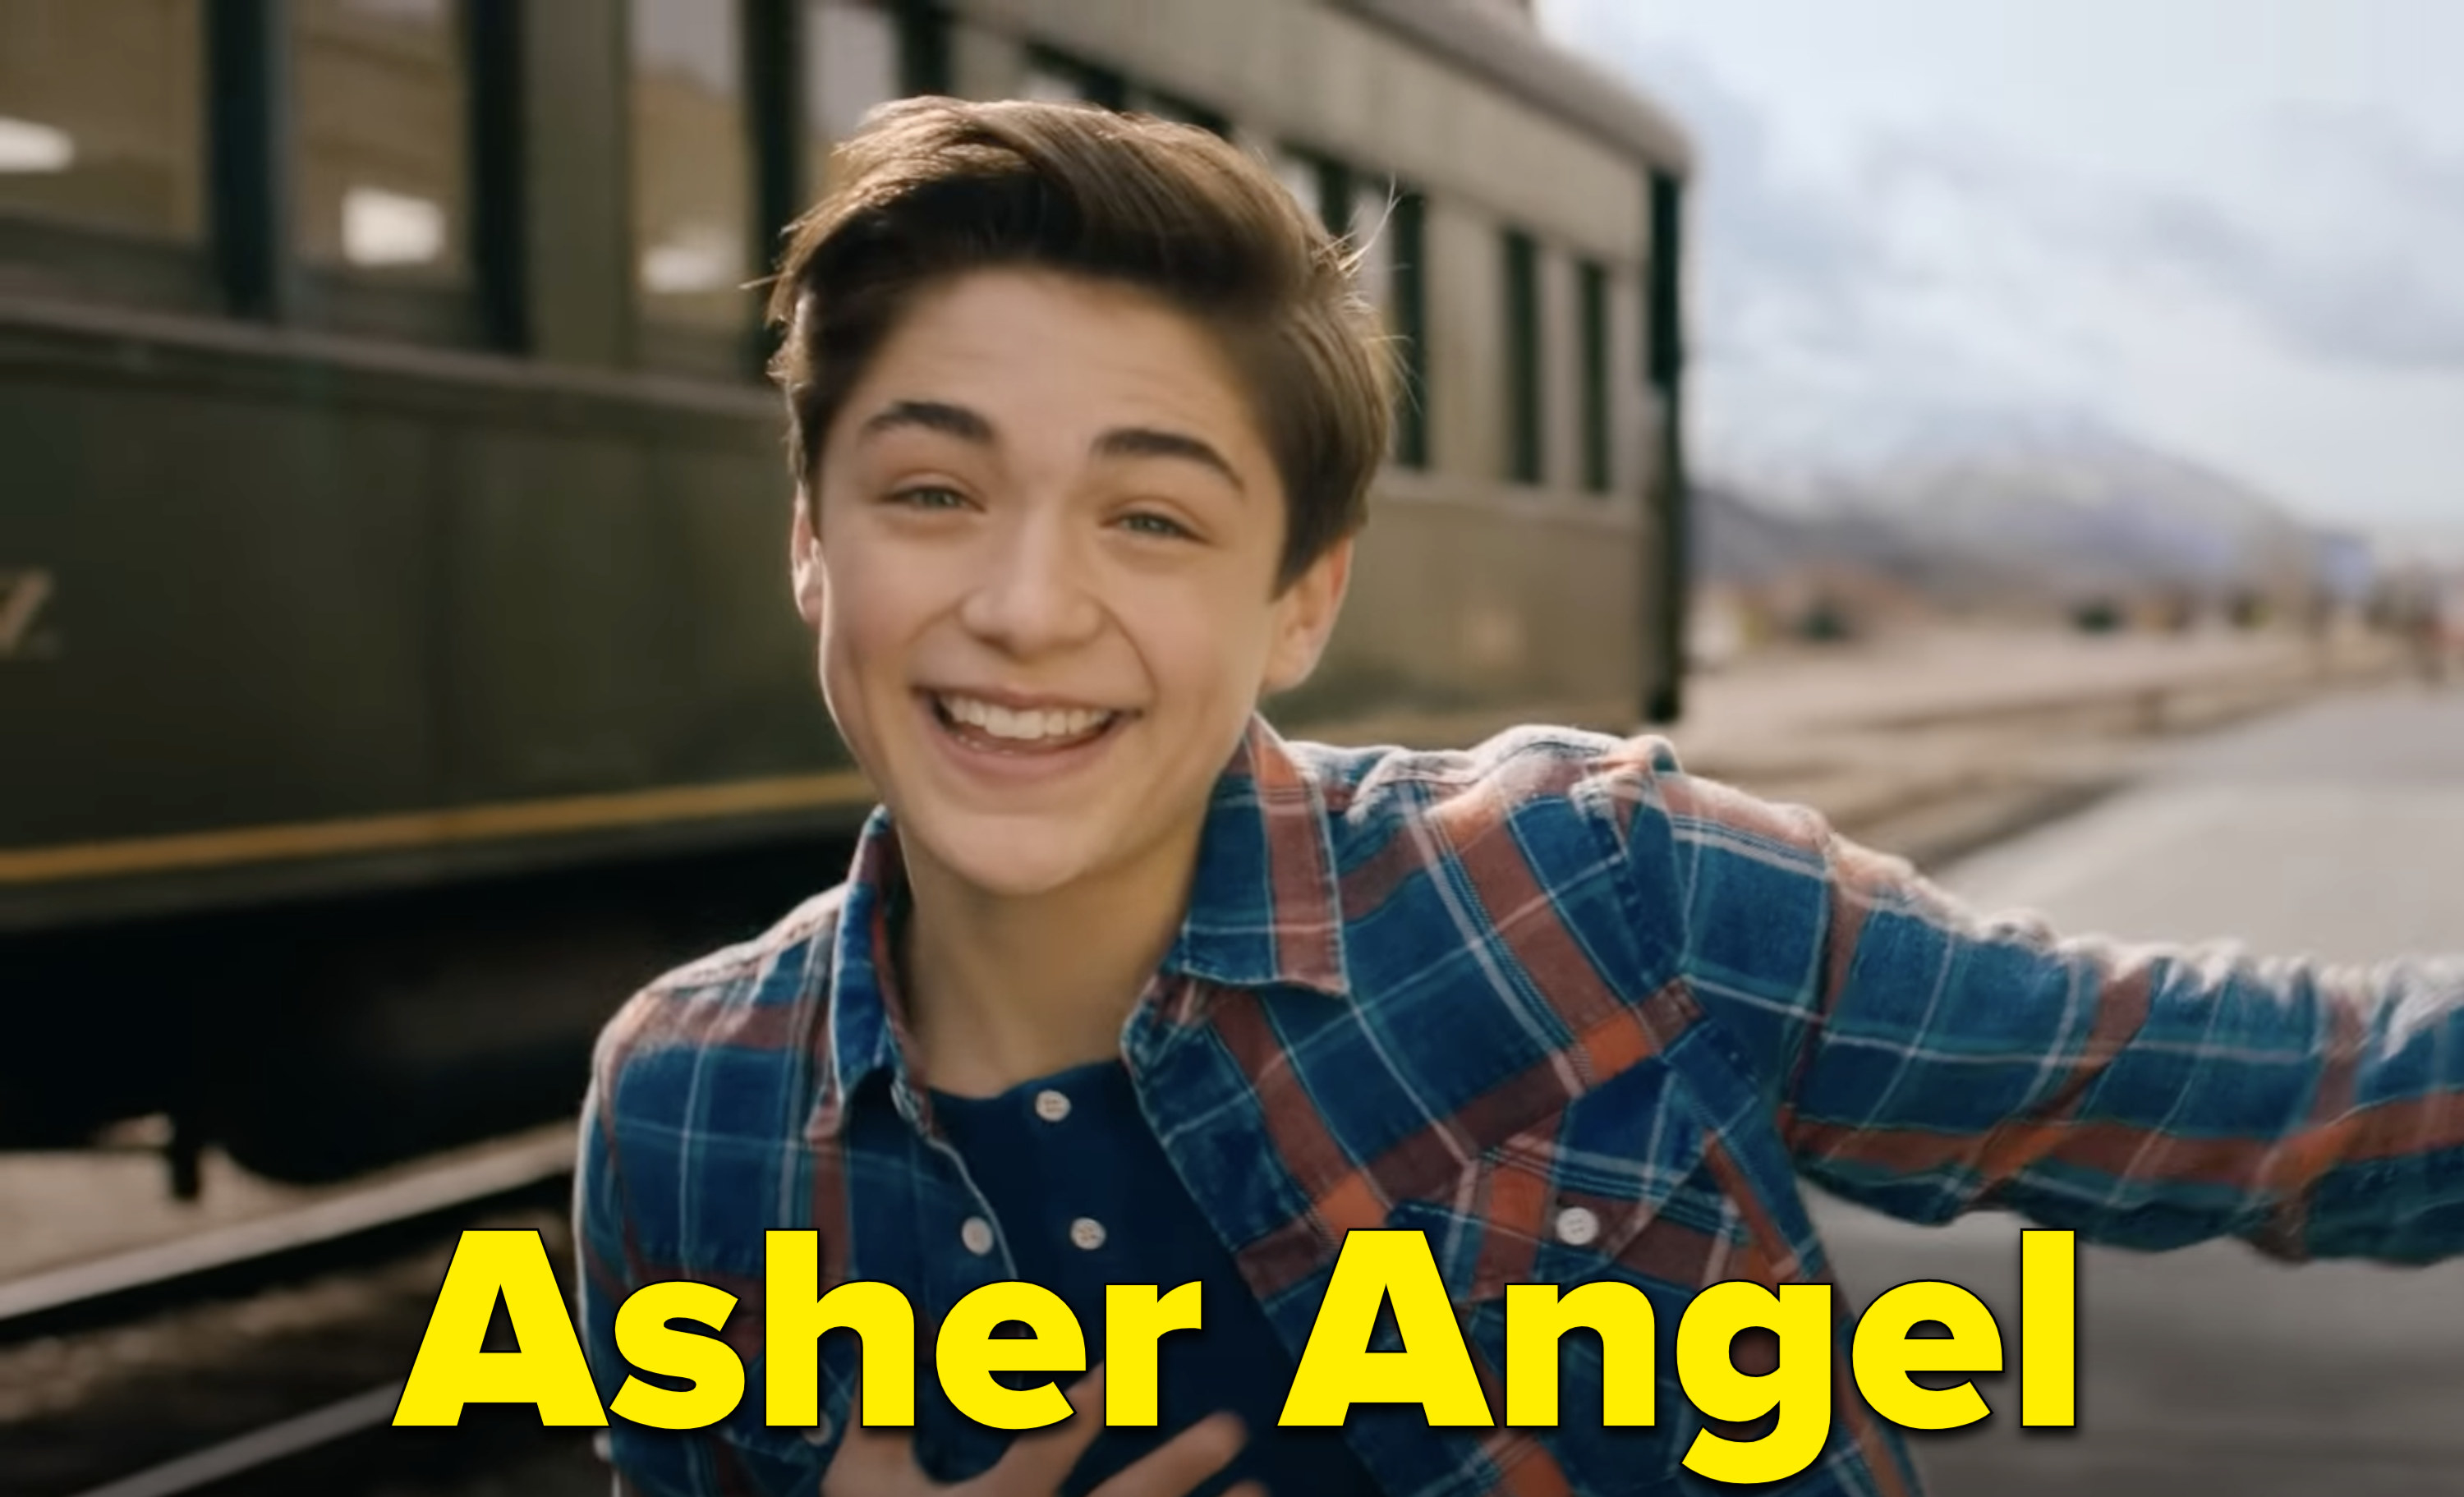 Asher Angel in a music video